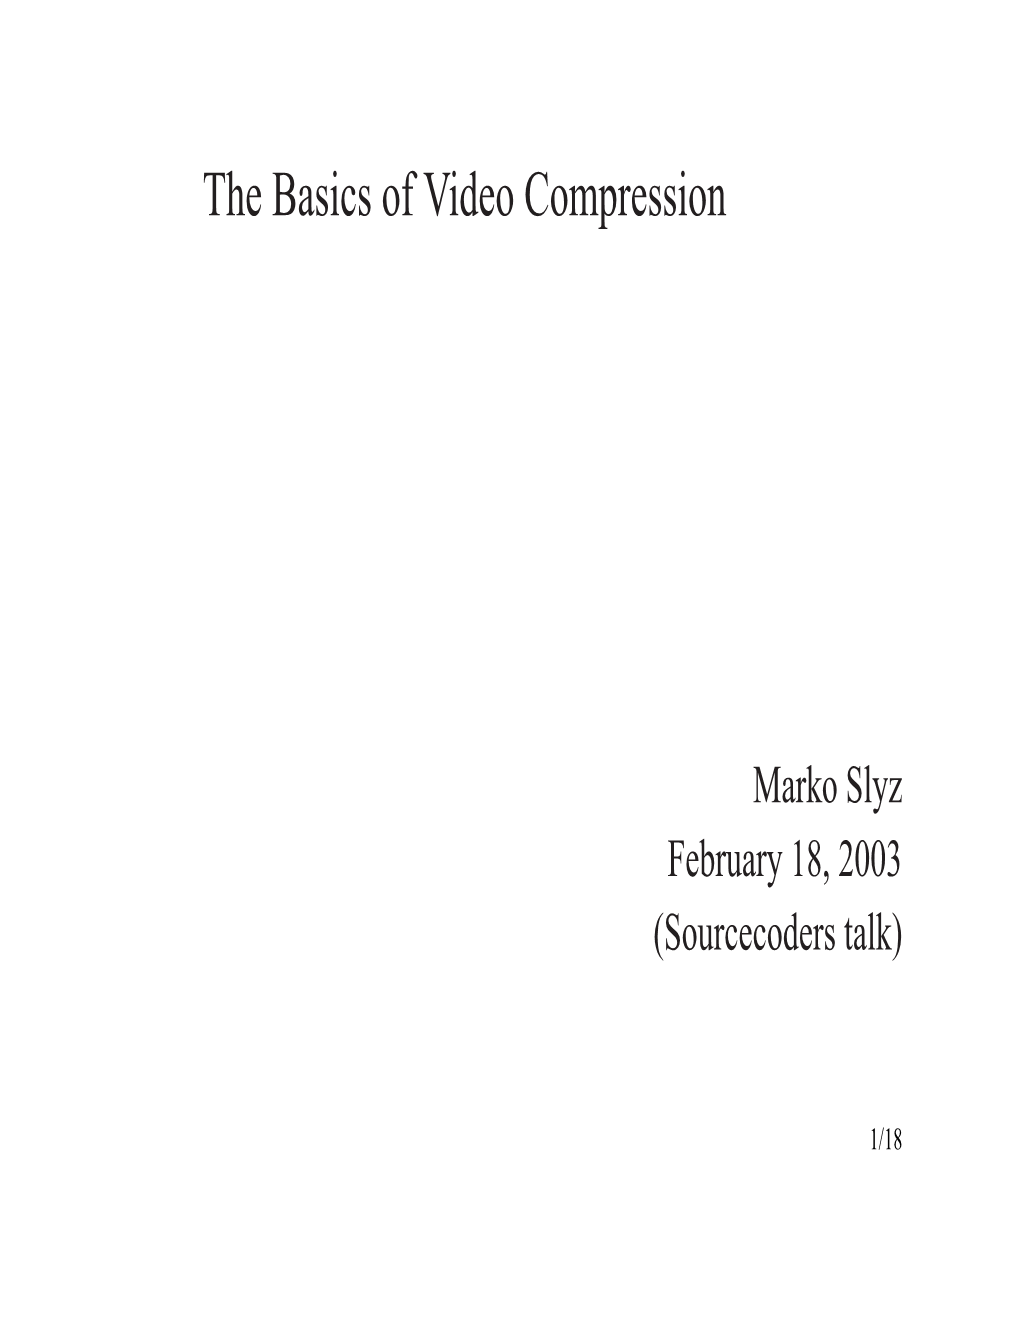 The Basics of Video Compression